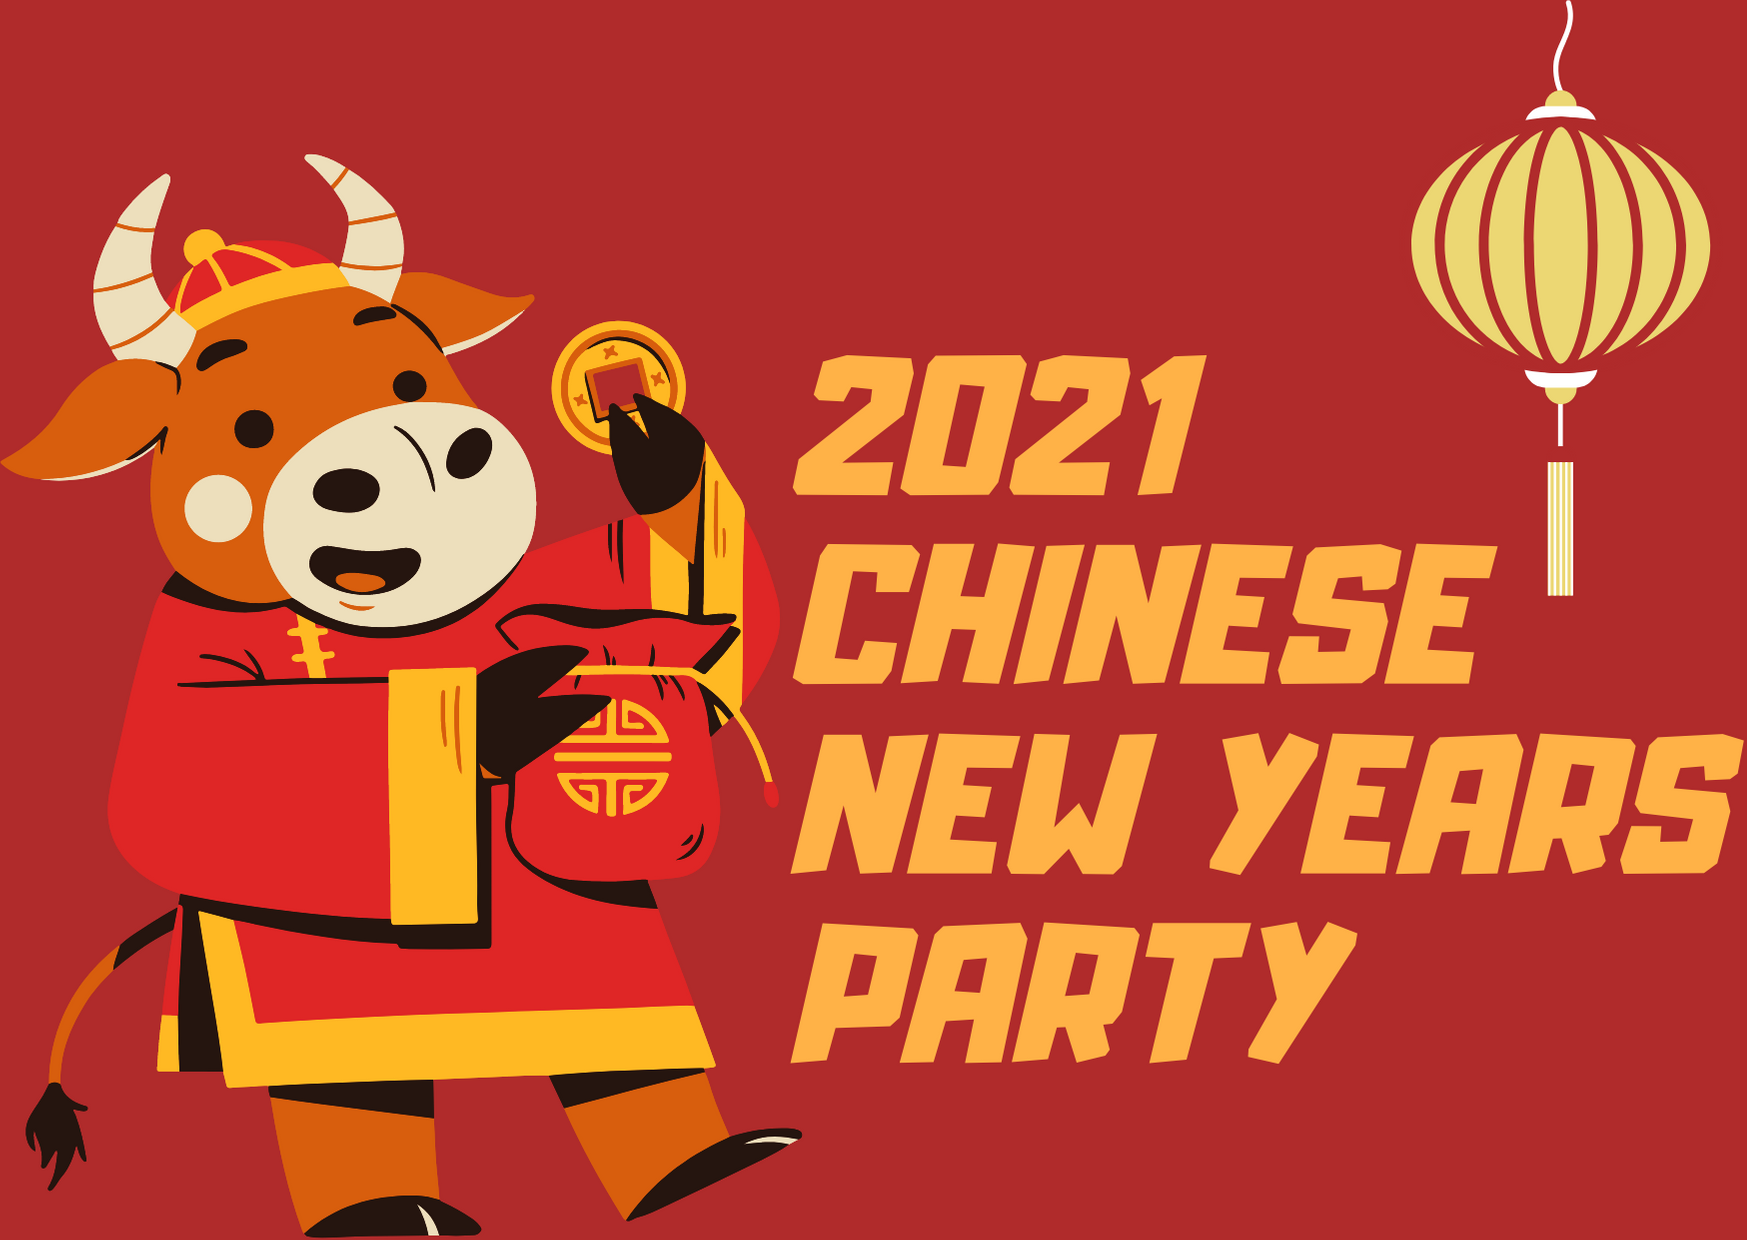 2021 Chinese New Years Party